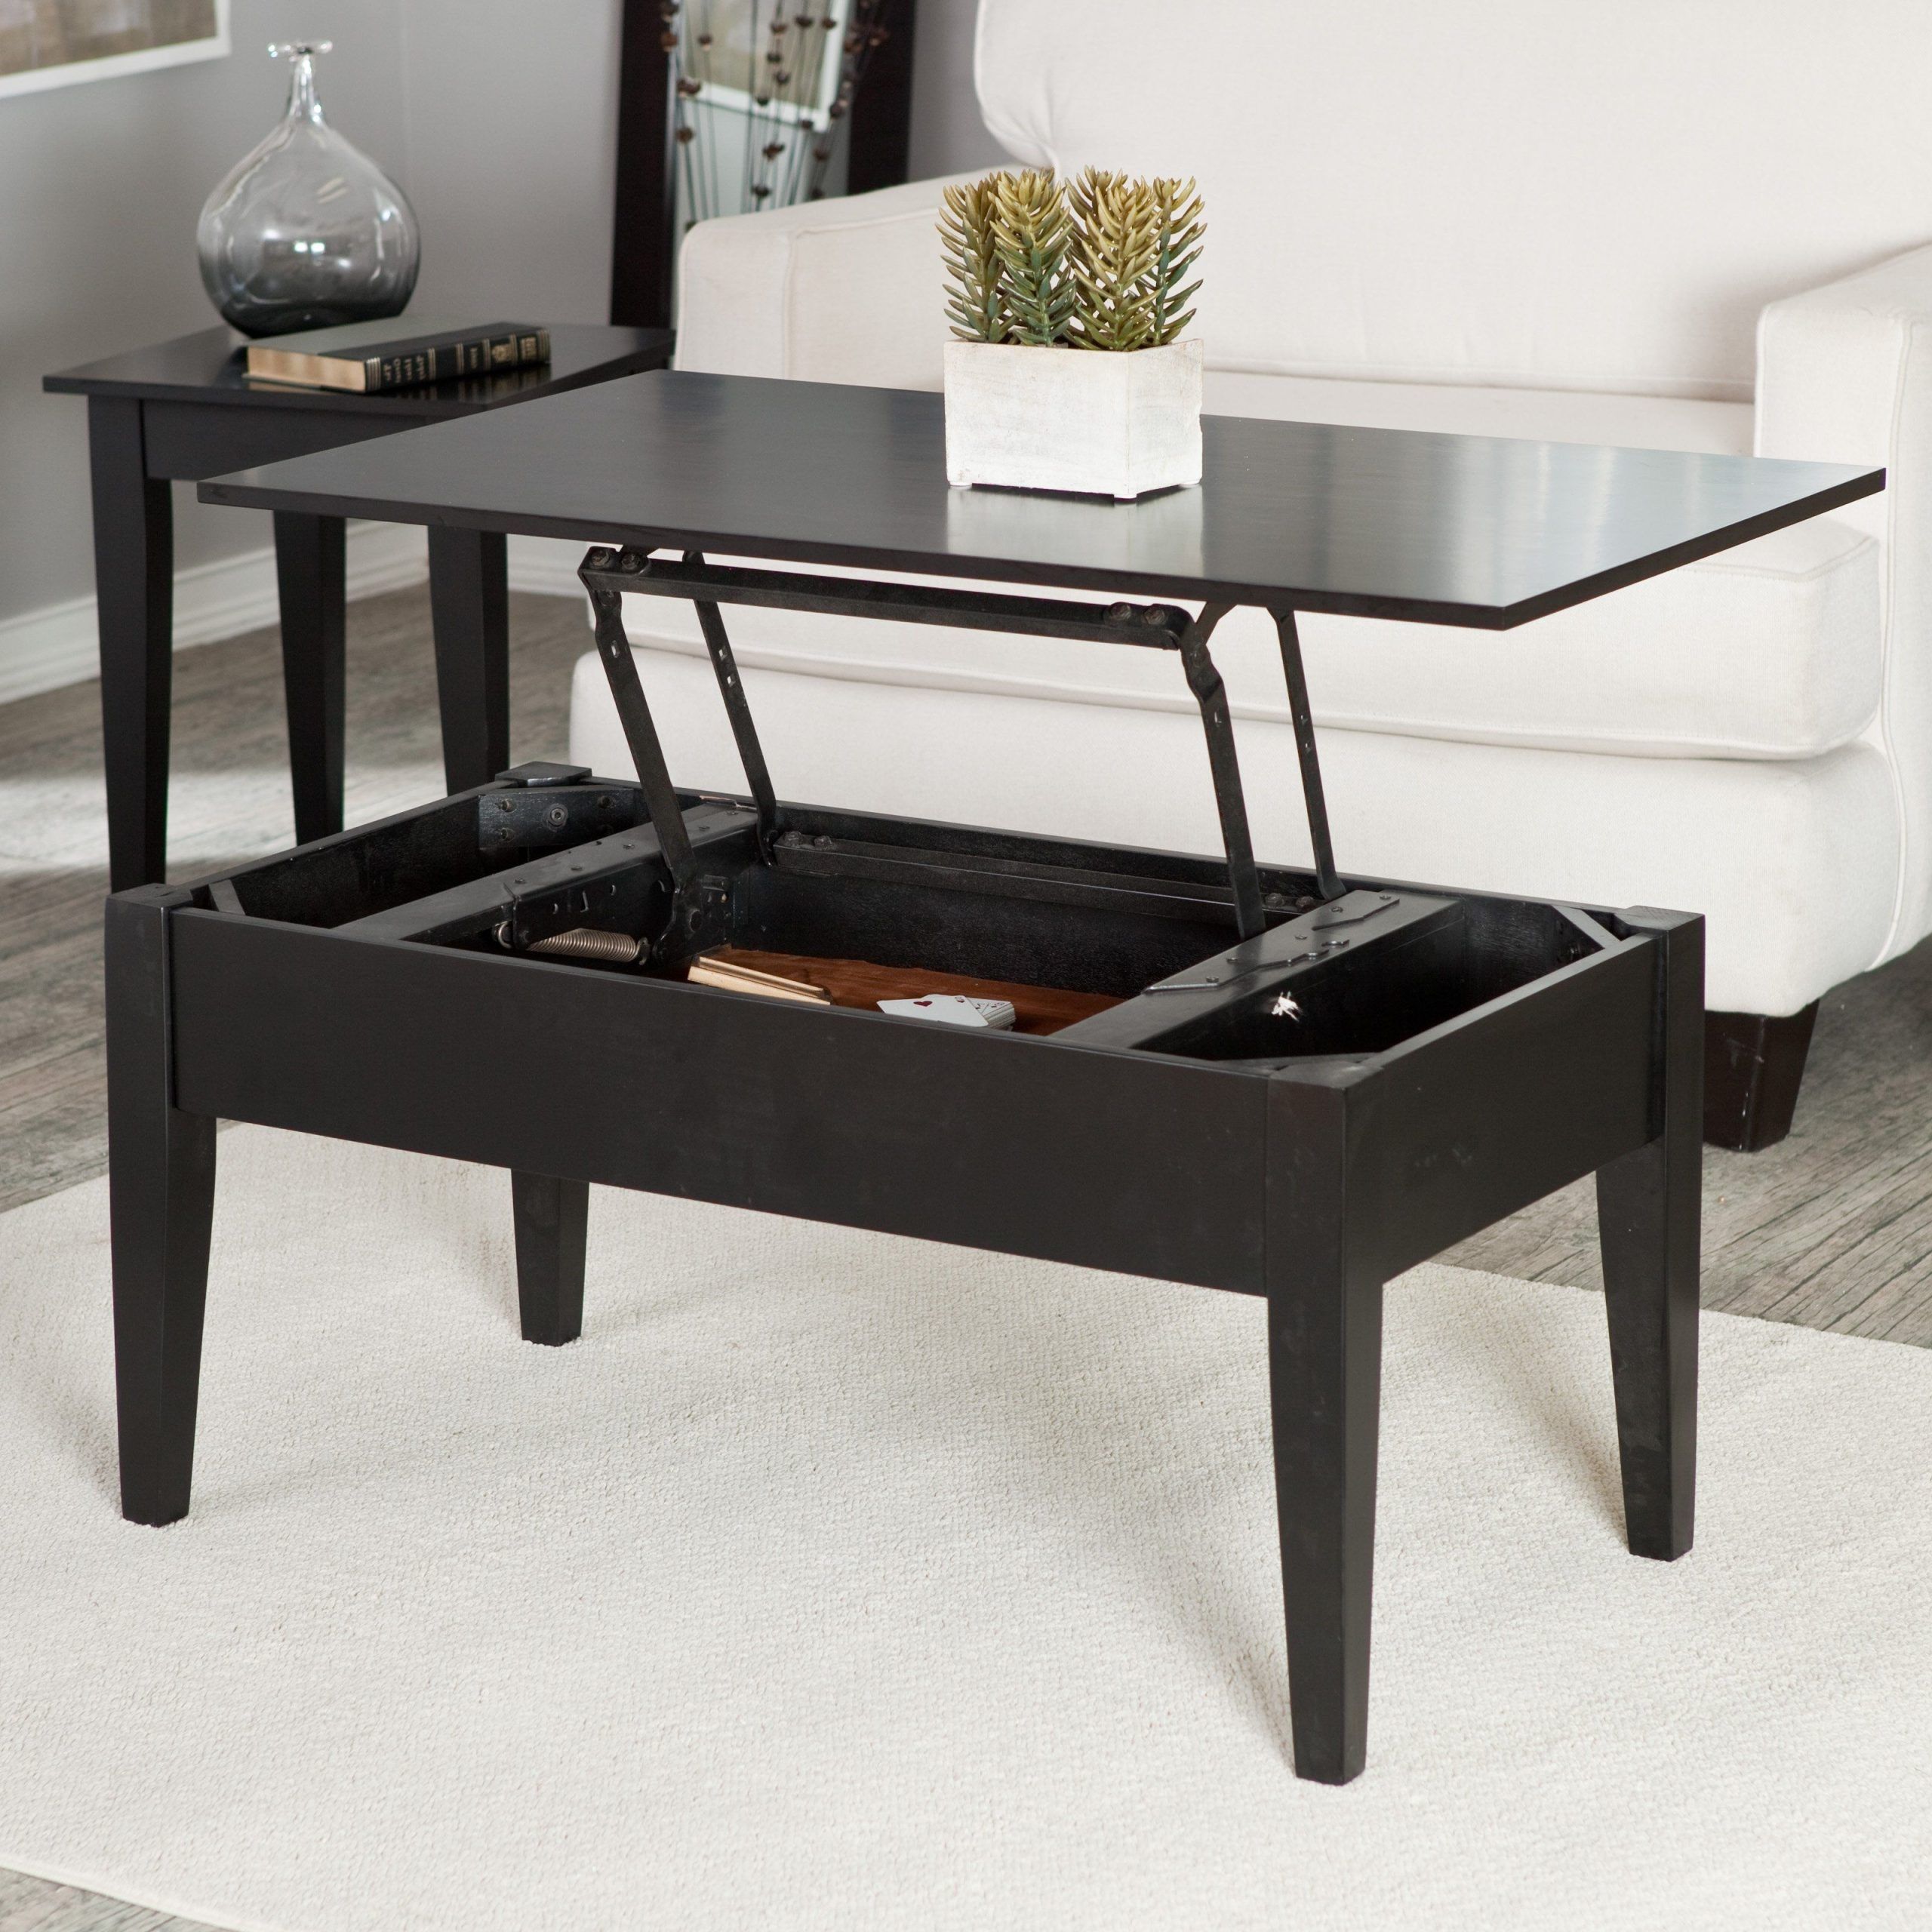 High Gloss Lift Top Coffee Tables For Popular Coffee Table That Top Lifts Up (View 15 of 15)